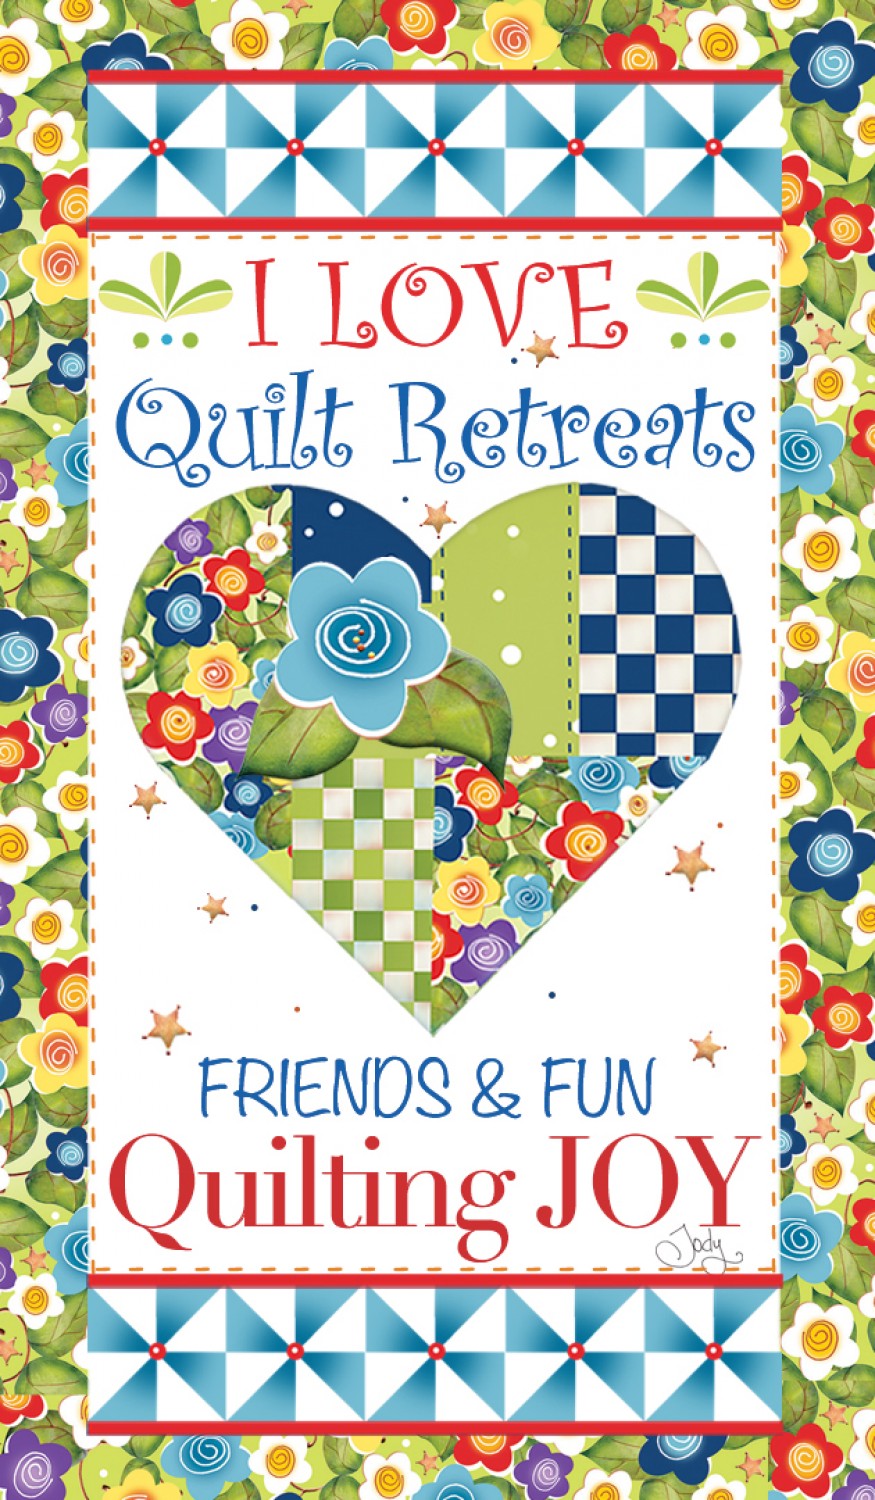 Magnet Quilt Retreat Love by Jody Houghton Designs